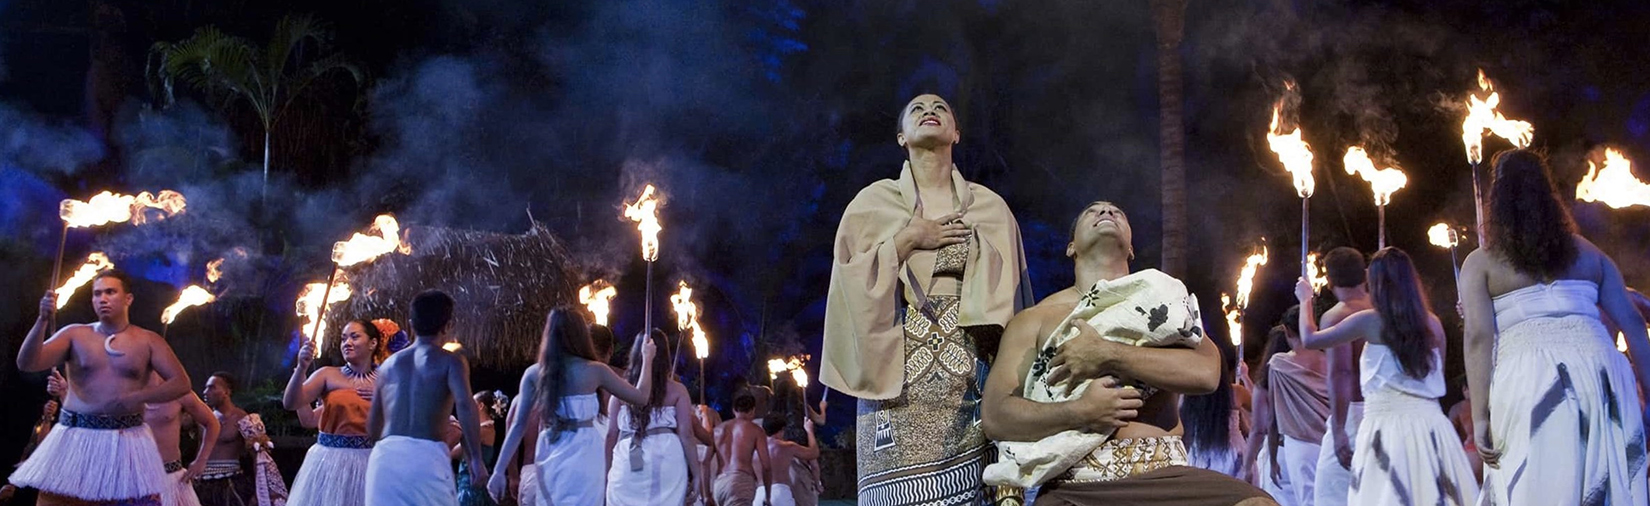 The cast of Ha: Breath of LIfe performs on stage with lit torches.